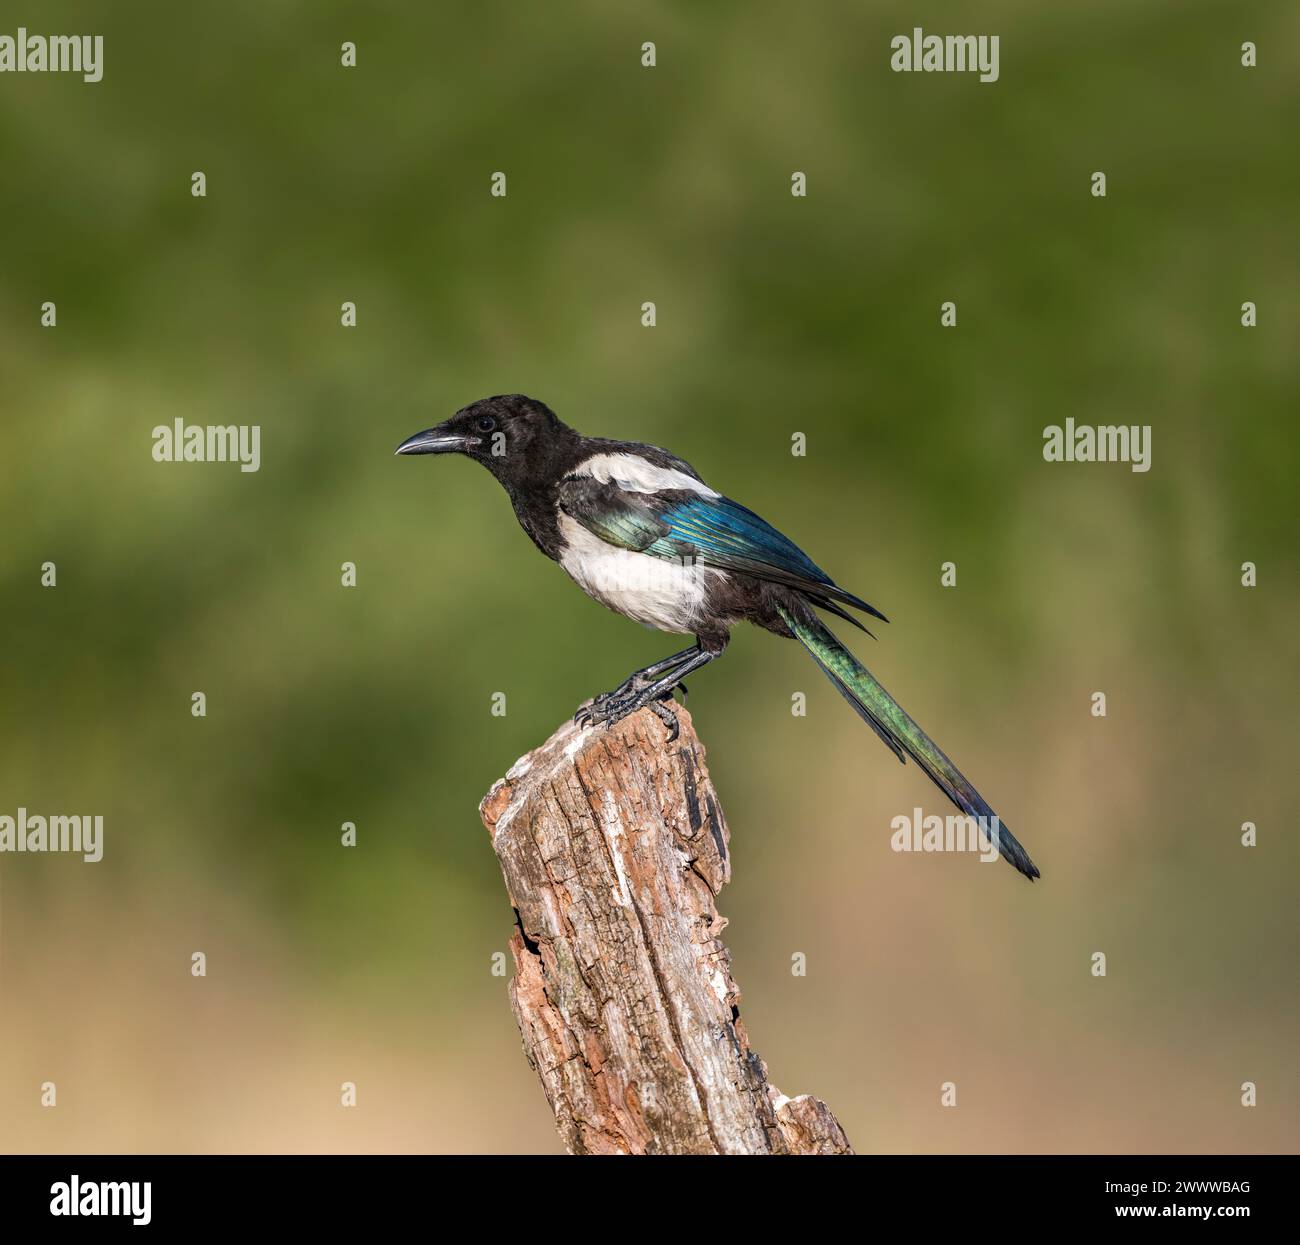 Magpie ; Pica pica ; On Tree Stump ; UK Banque D'Images